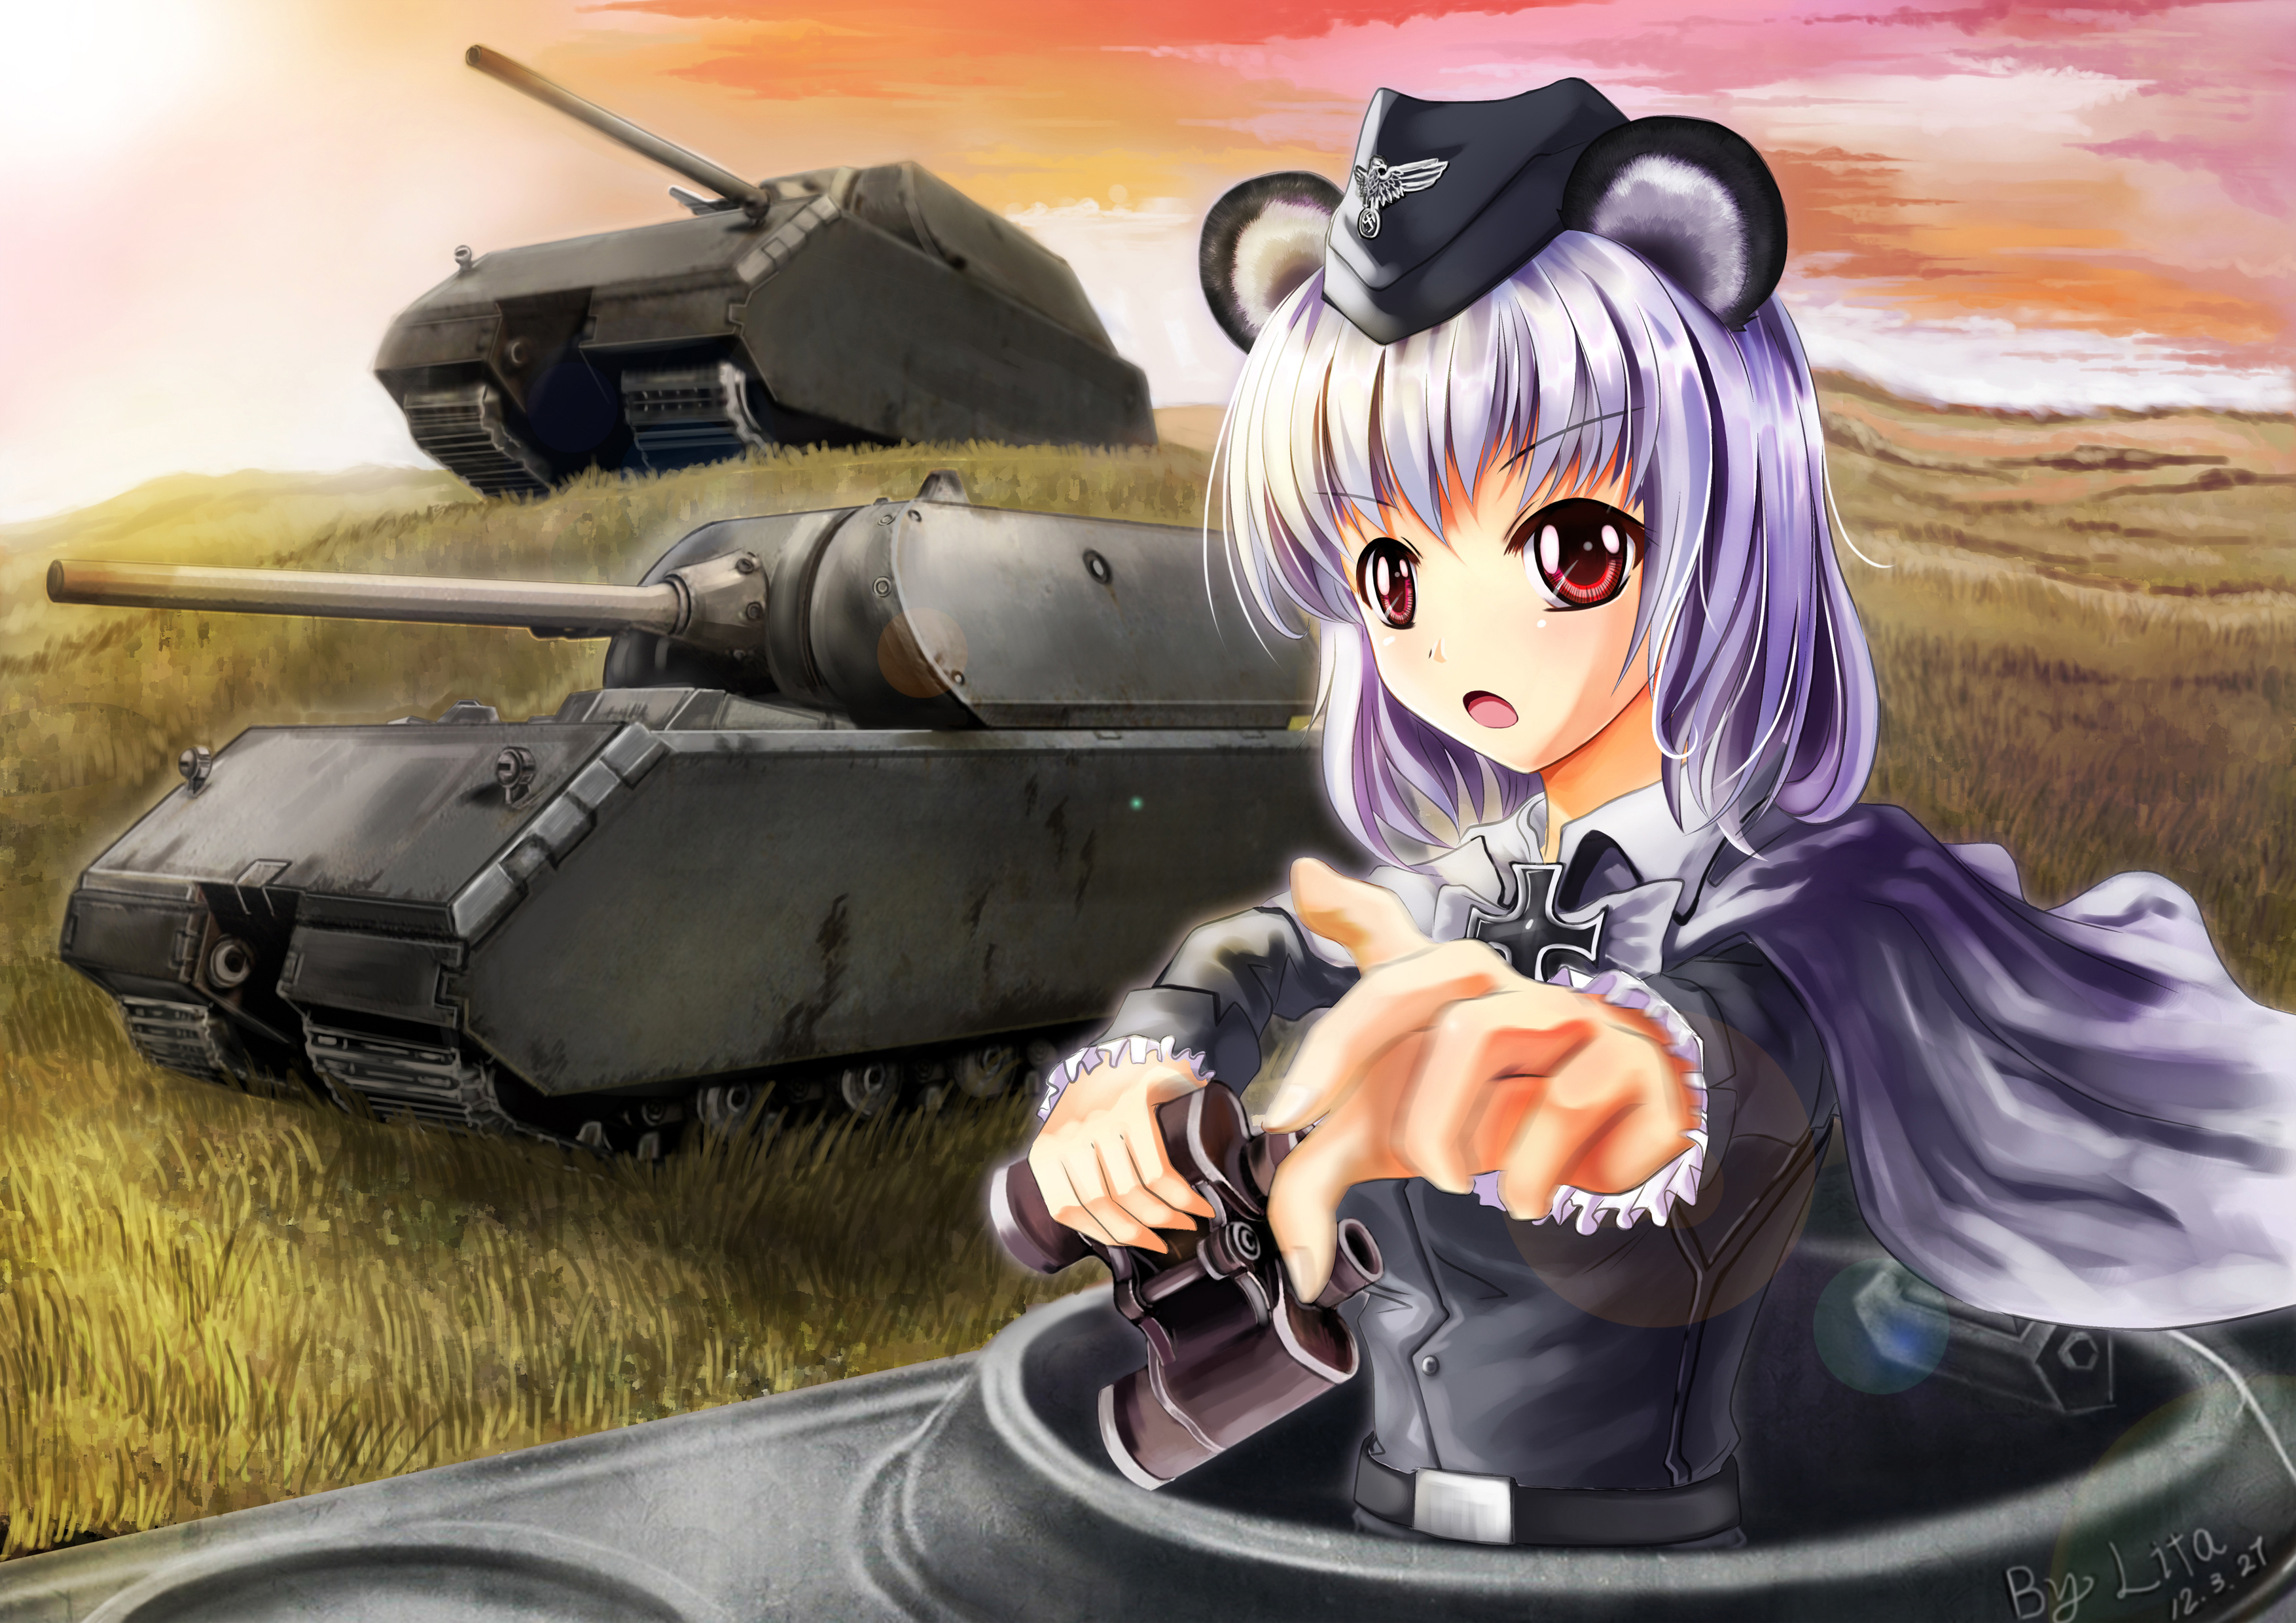 SDF sees surge of popularity thanks to anime tanks  Japan Today